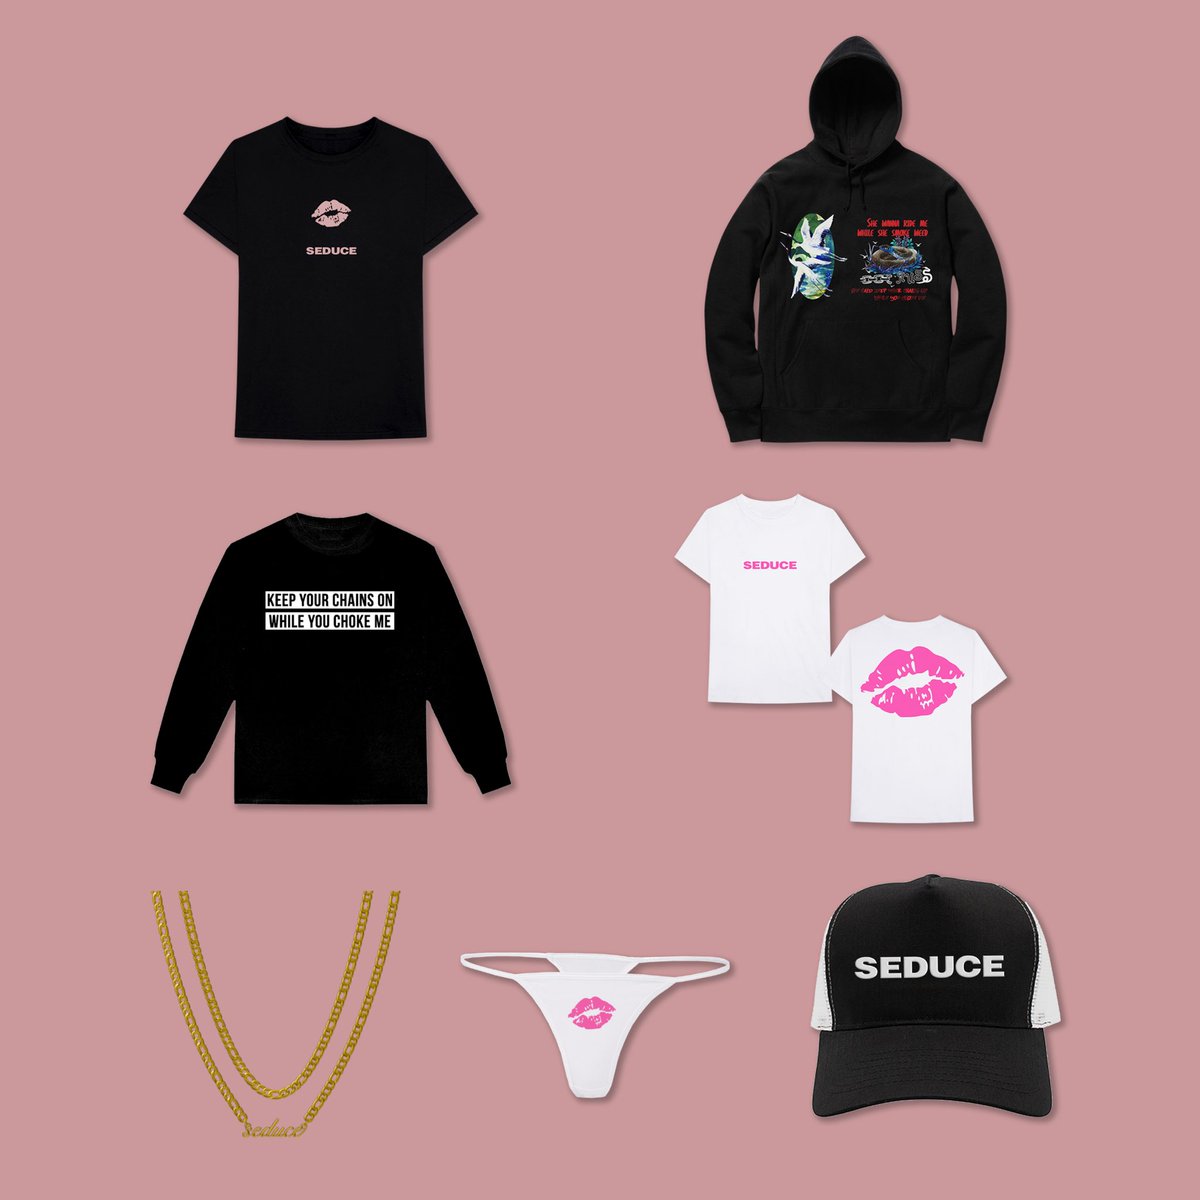 Dawn follow my upcoming merch store @weebies.store 🔞 spicy